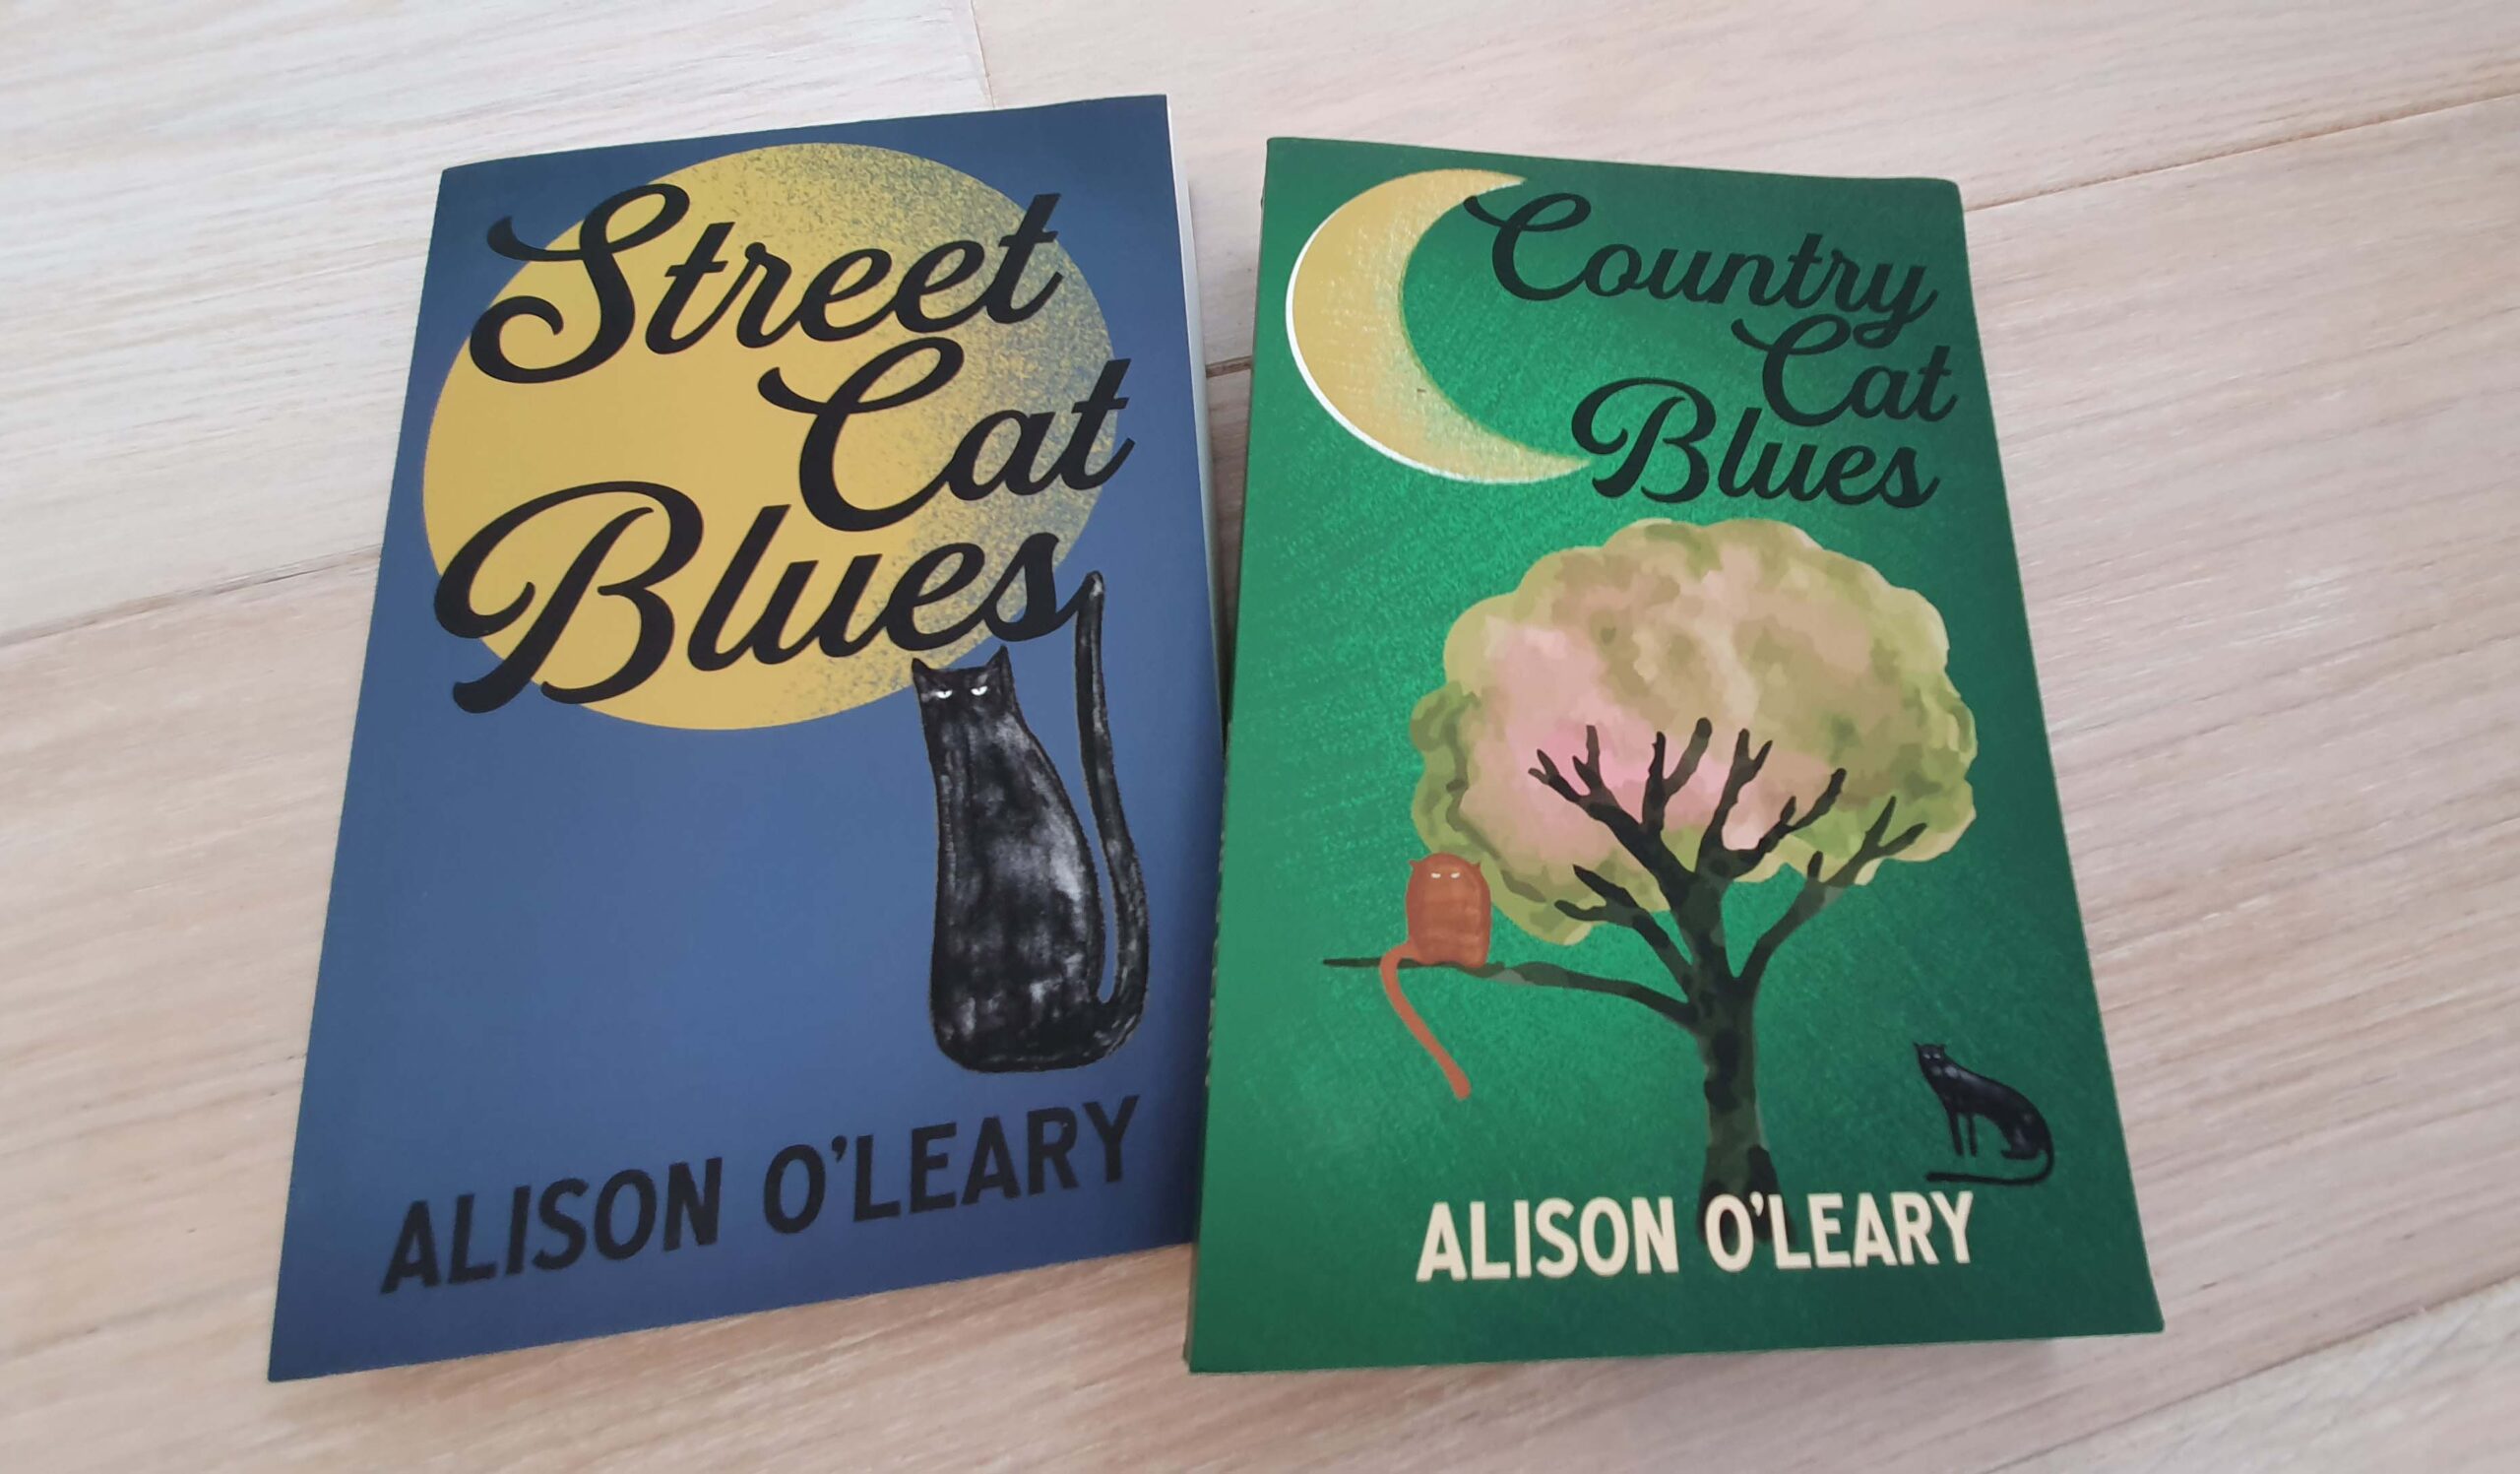 Street Cat and Country Cat Blues by Alison O Leary